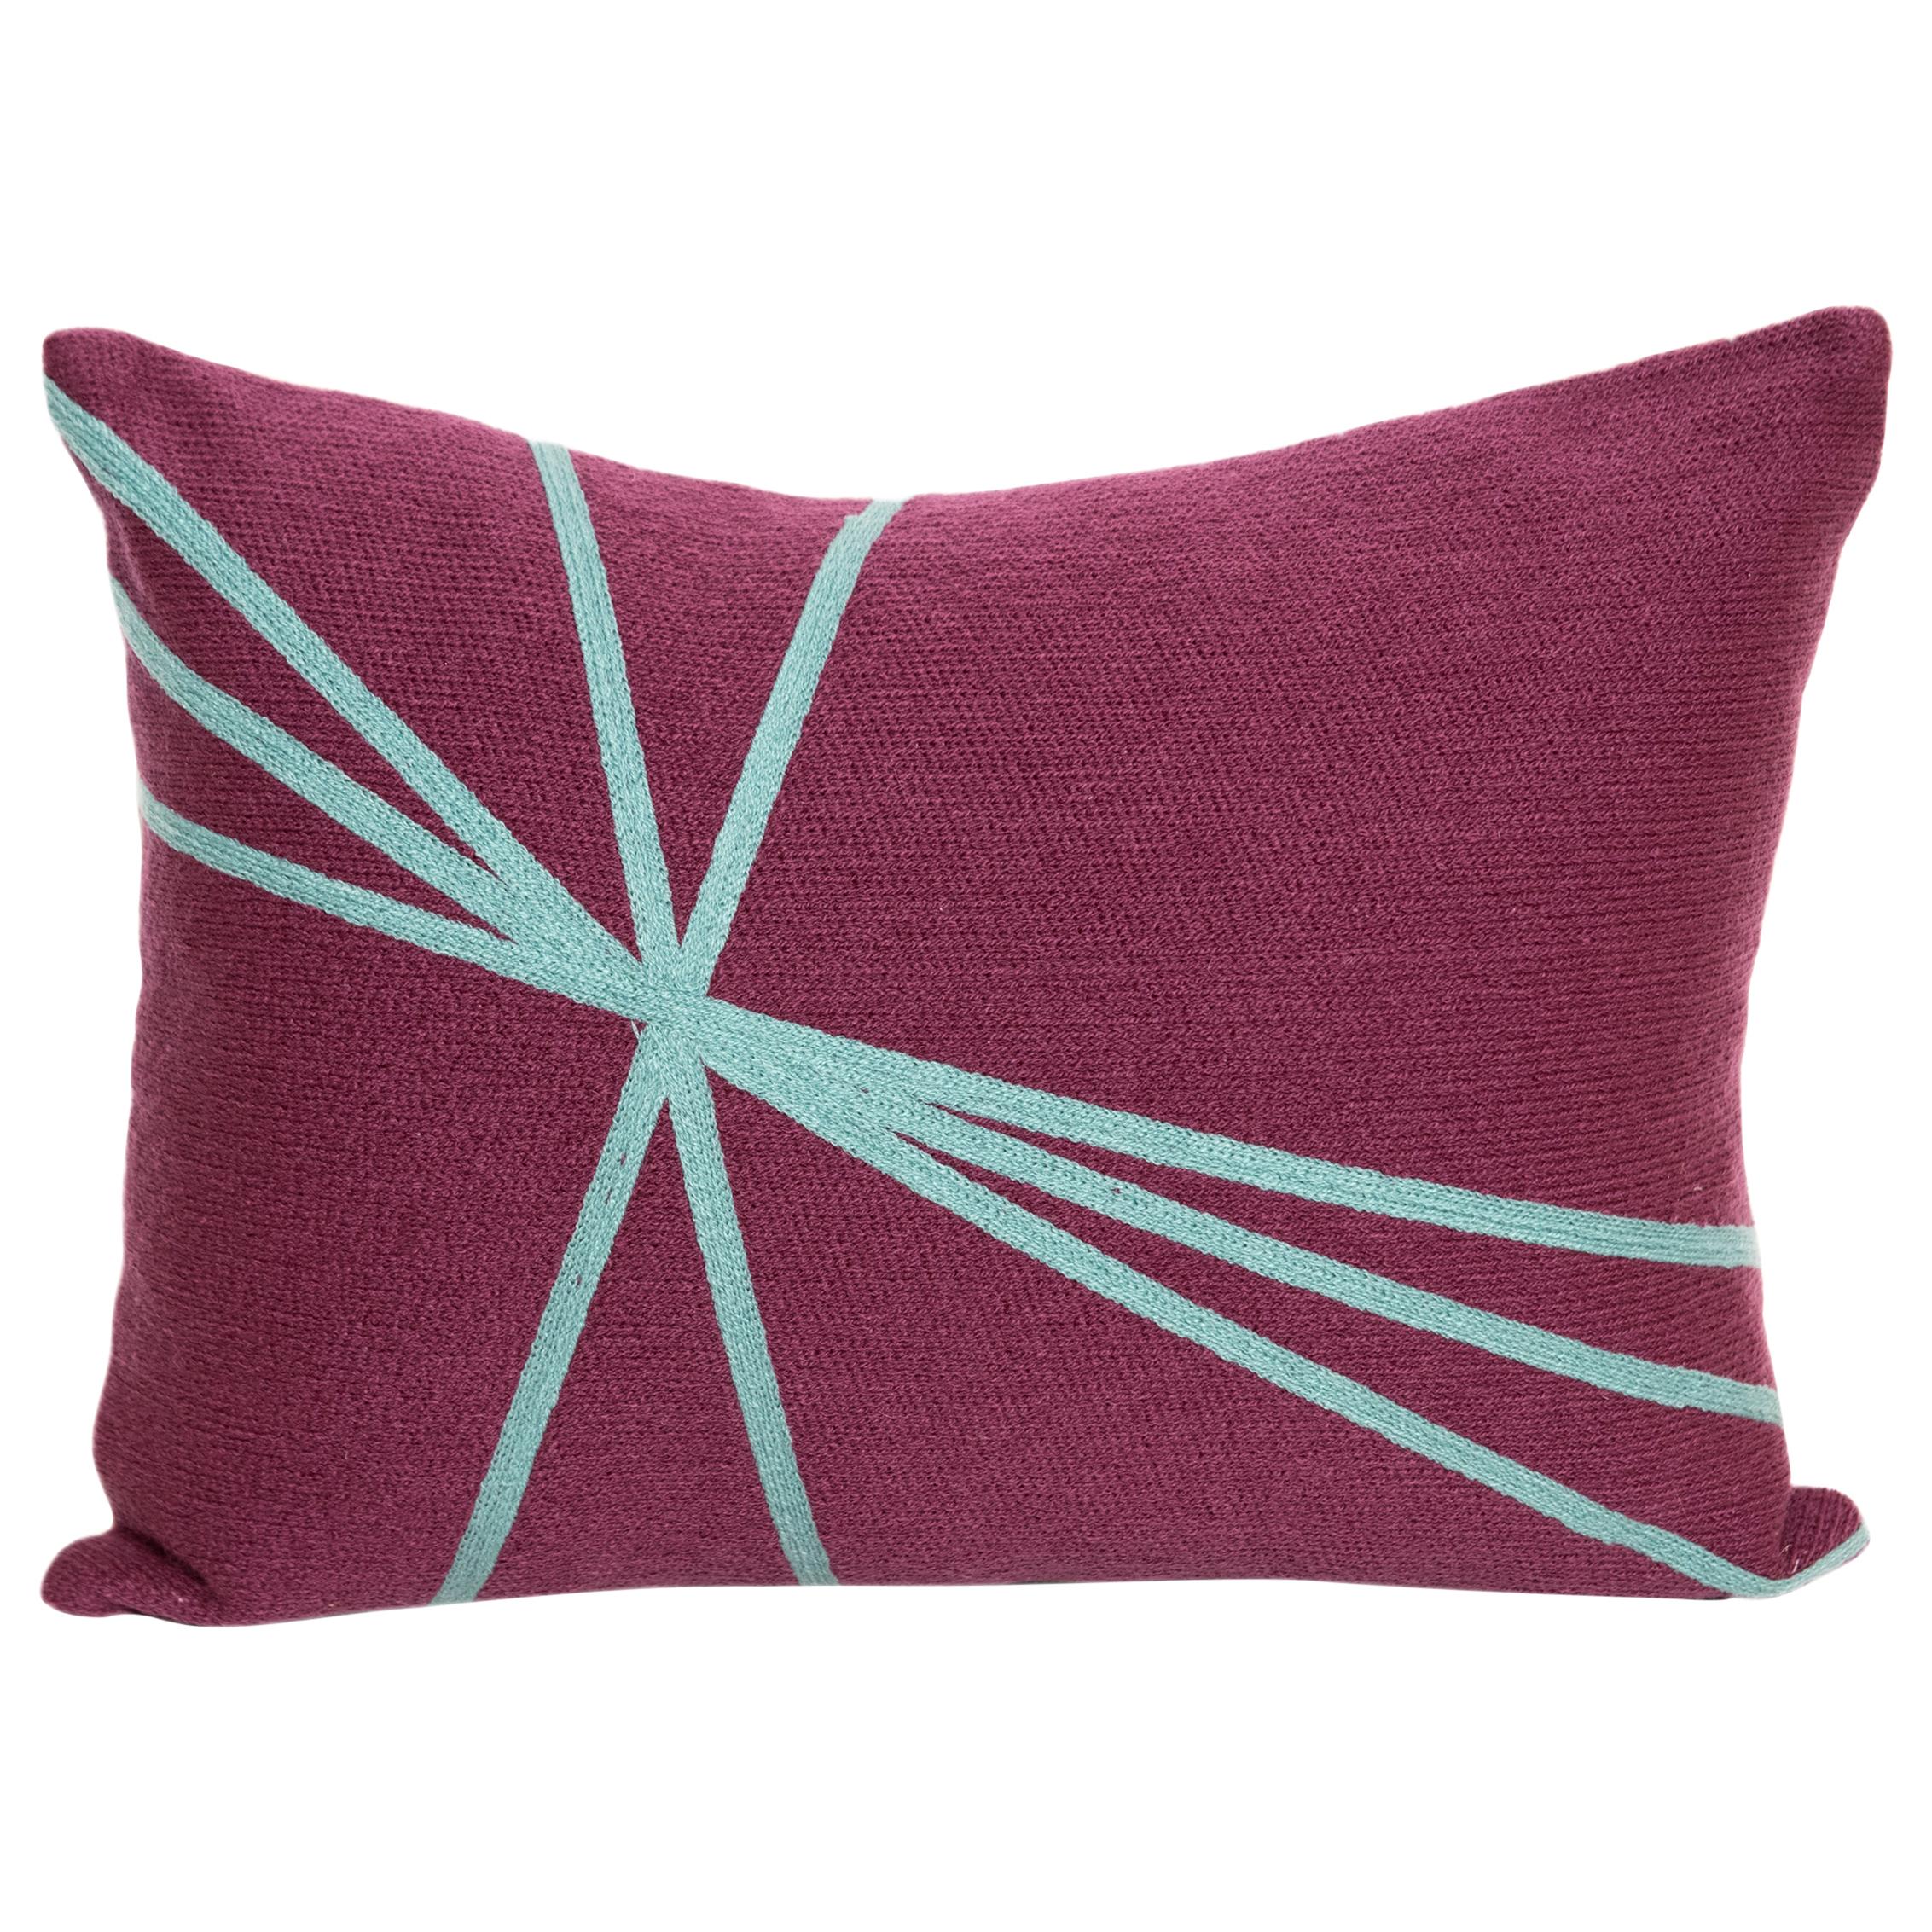 Contemporary Modern Embroidery Pillow Cushion Cotton Lines Pulple Turquoise